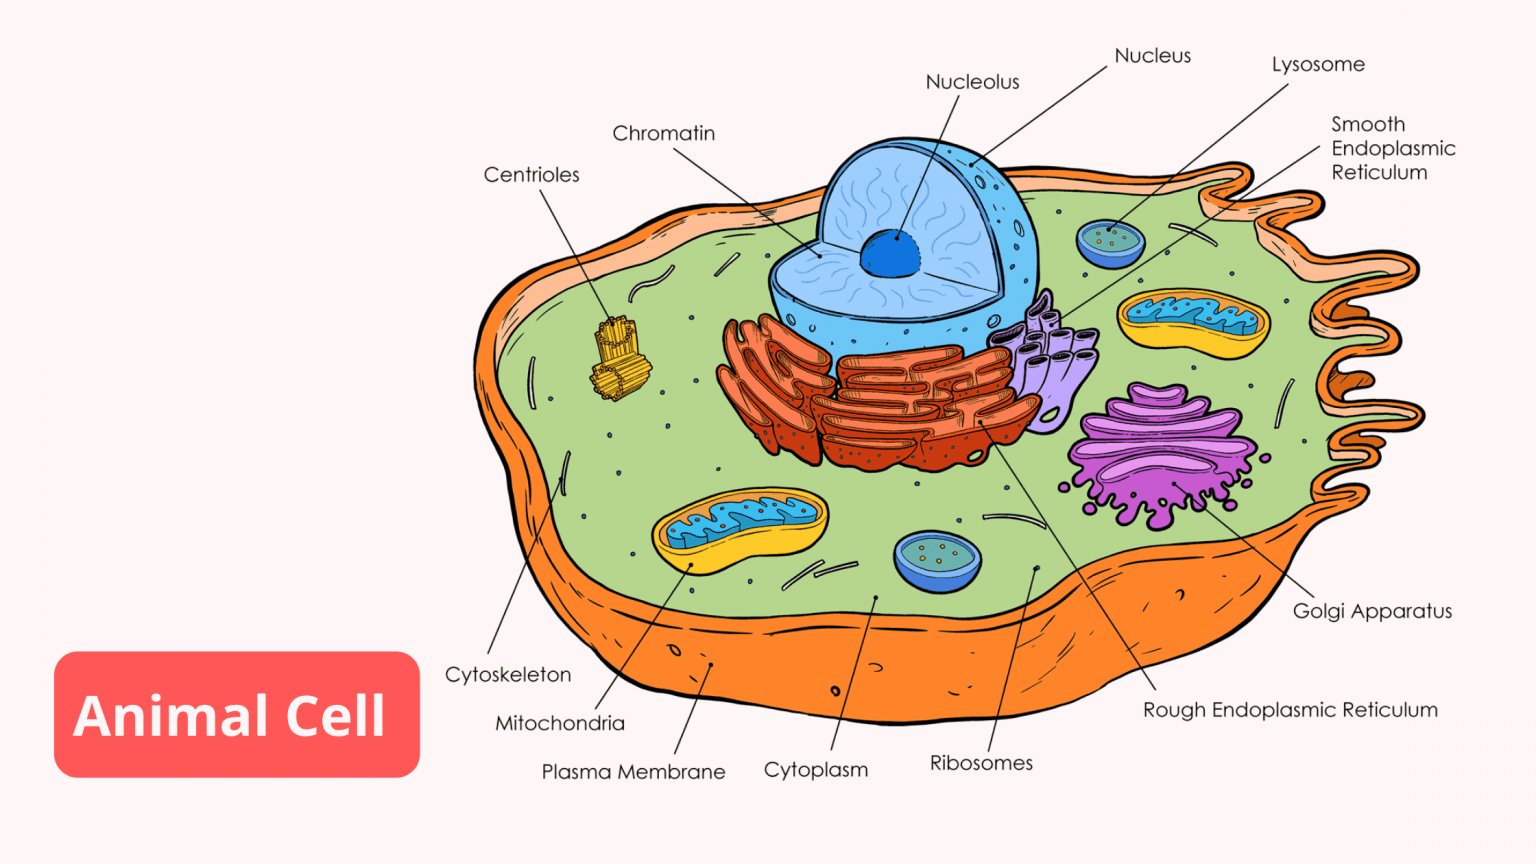 Animal Cell structure